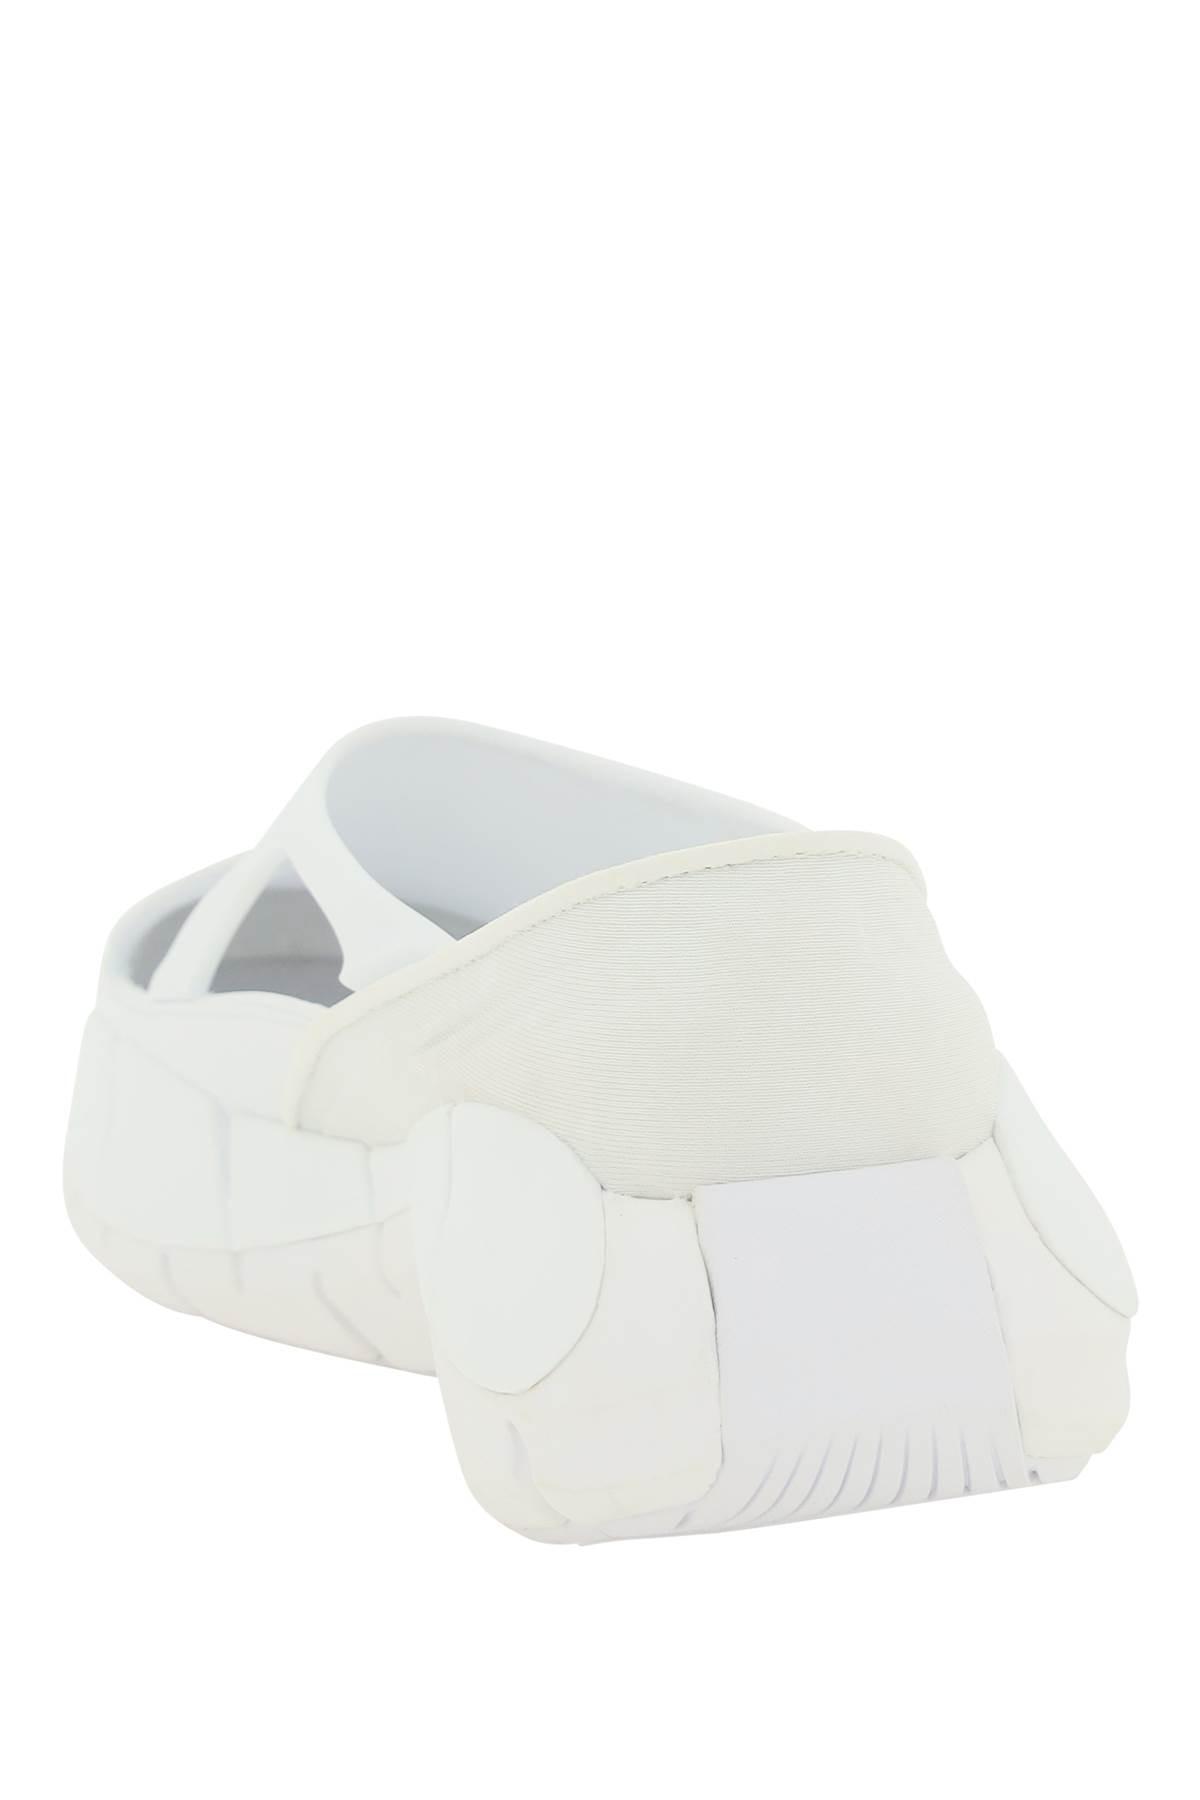 Maison Margiela Rubber Project 0 Cr Reebok Sneakers in White for Men - Save  28% | Lyst